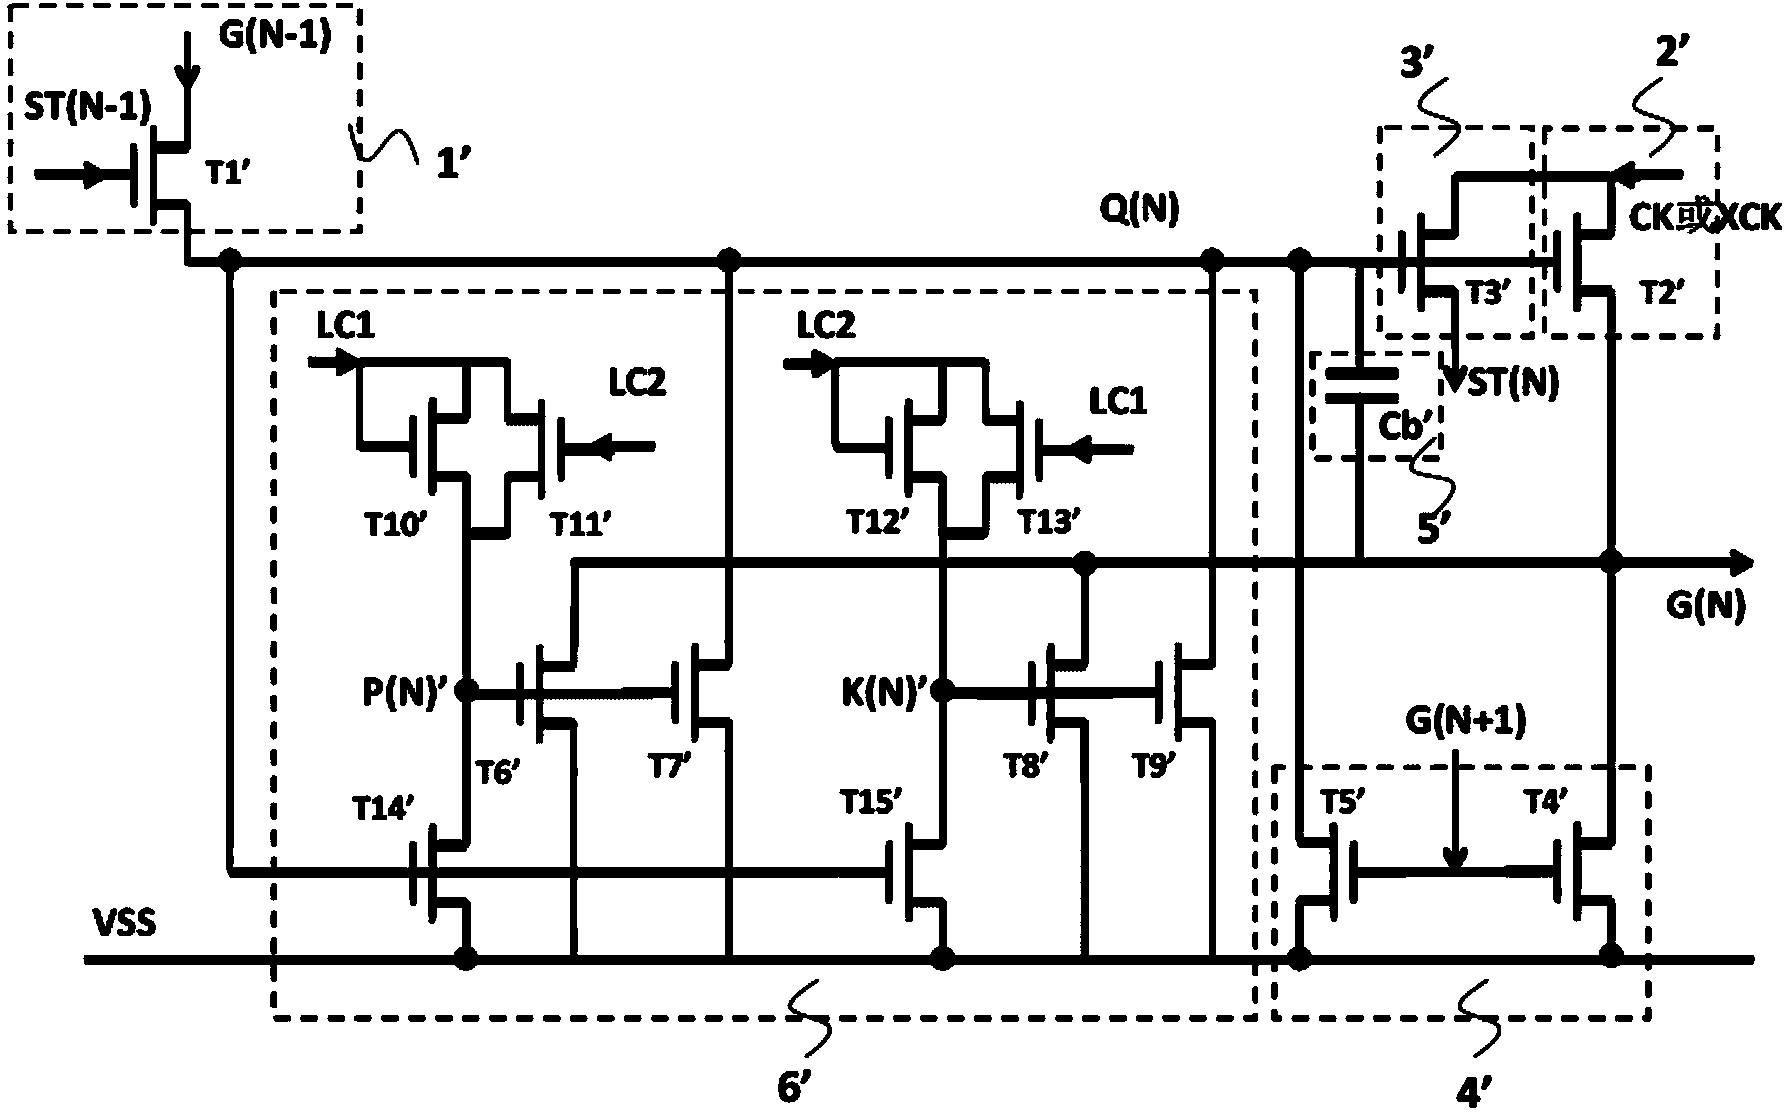 Grid drive circuit with self-compensation function